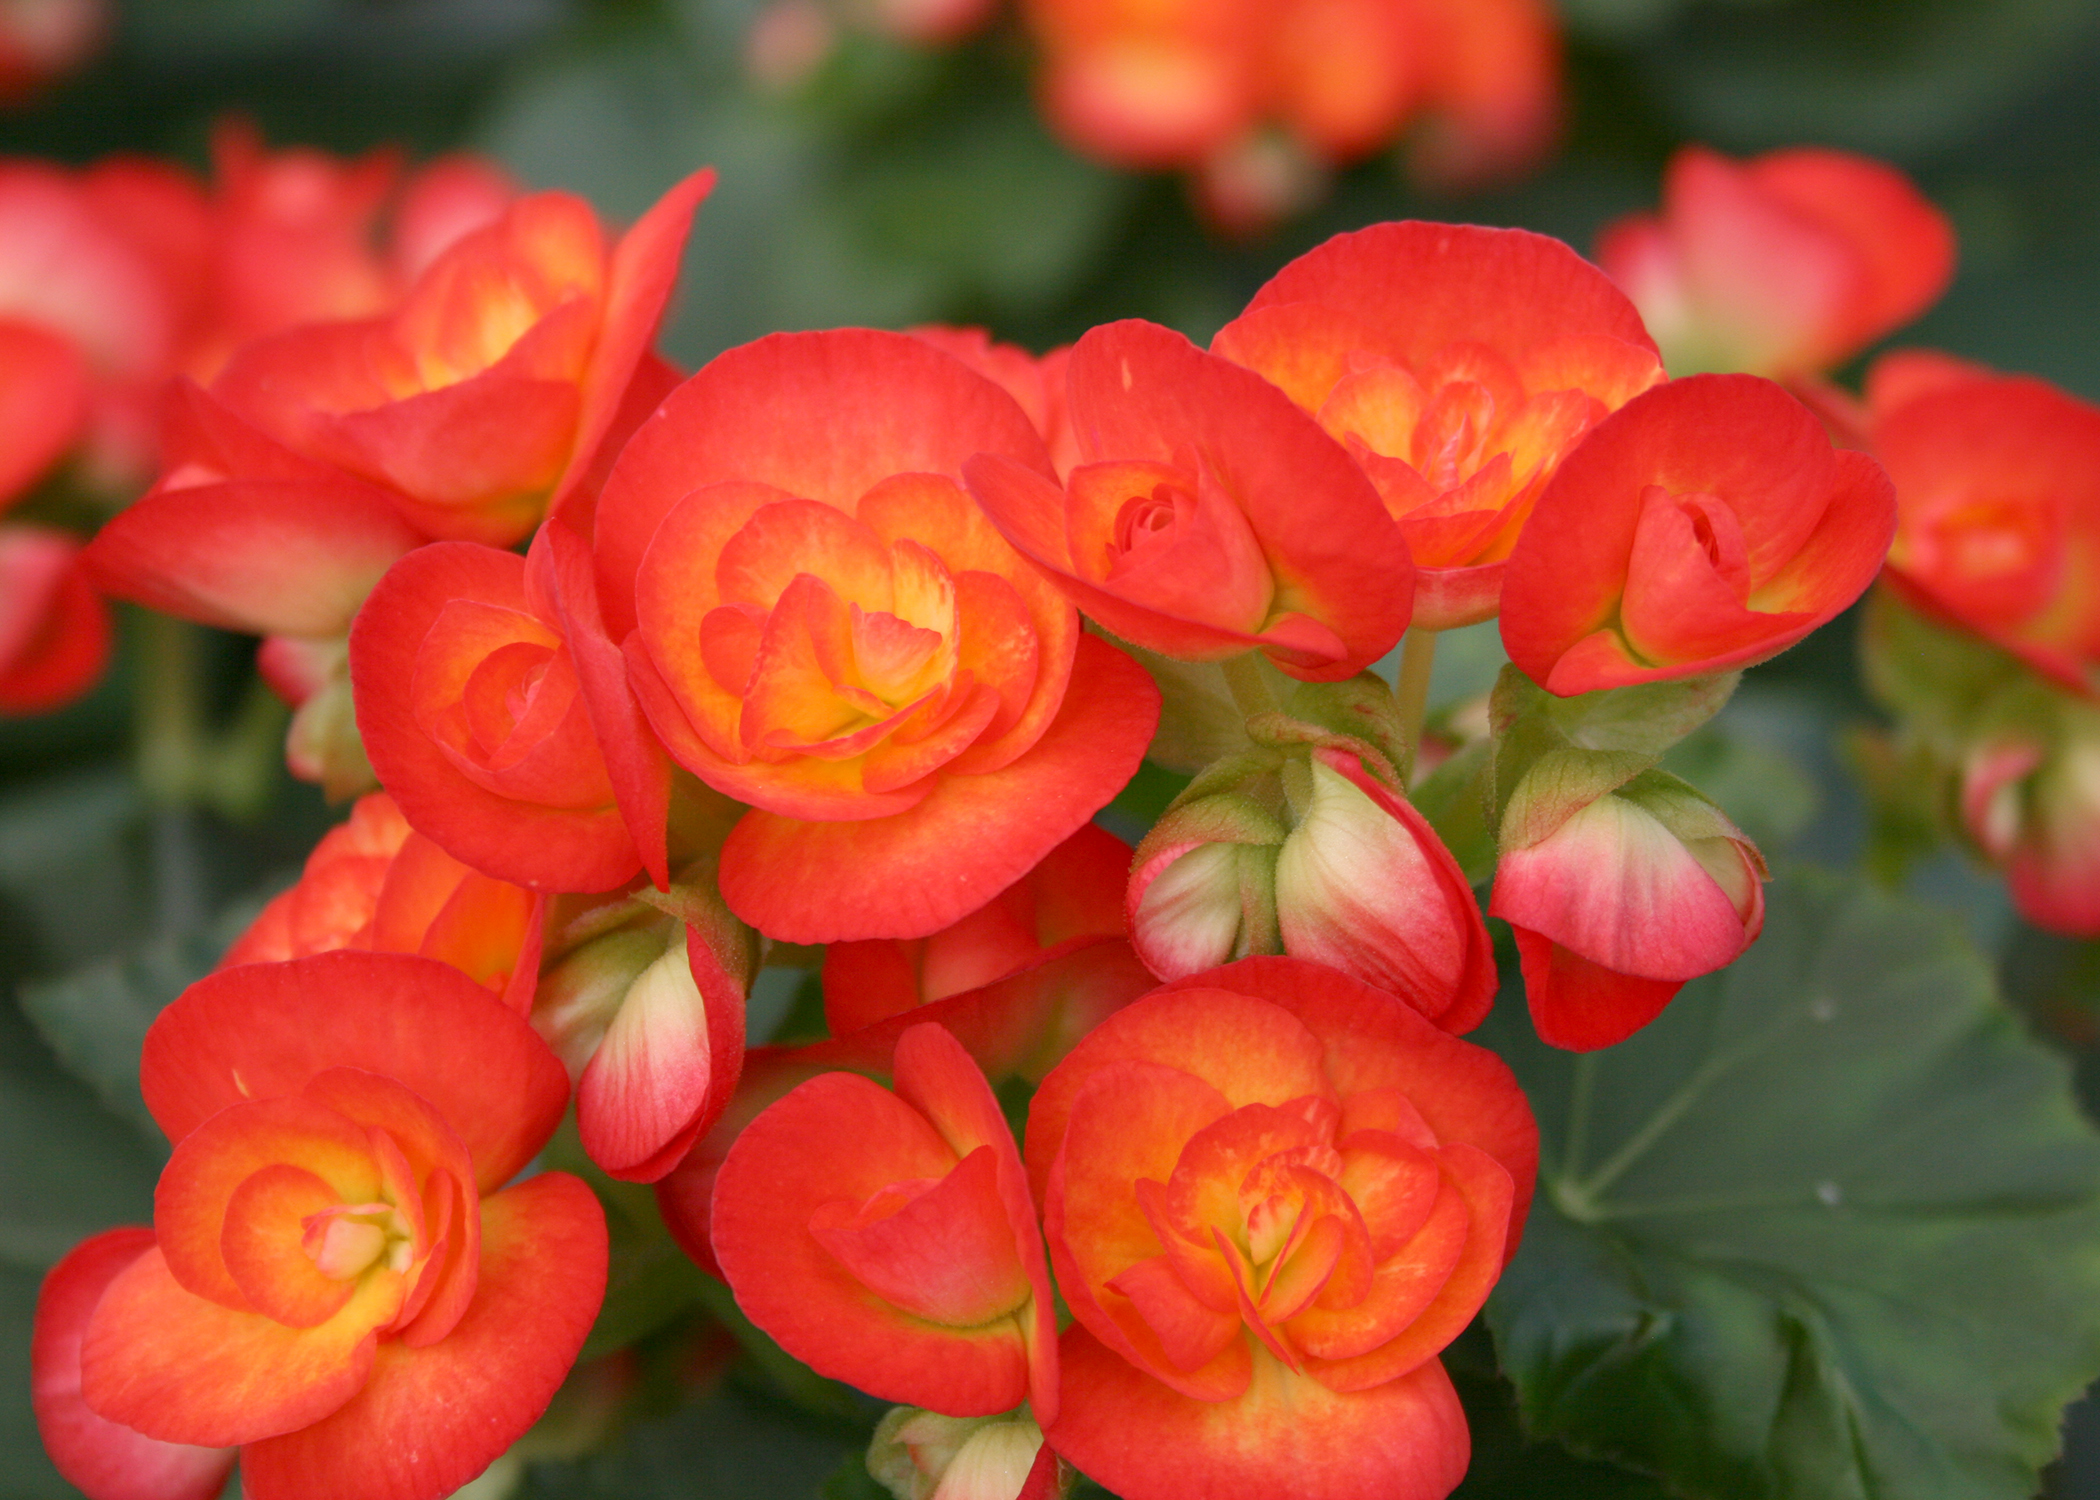 Having plants such as these Carneval begonias indoors during the winter adds beauty and a sense of charm and serenity. (Photo by MSU Extension/Gary Bachman)